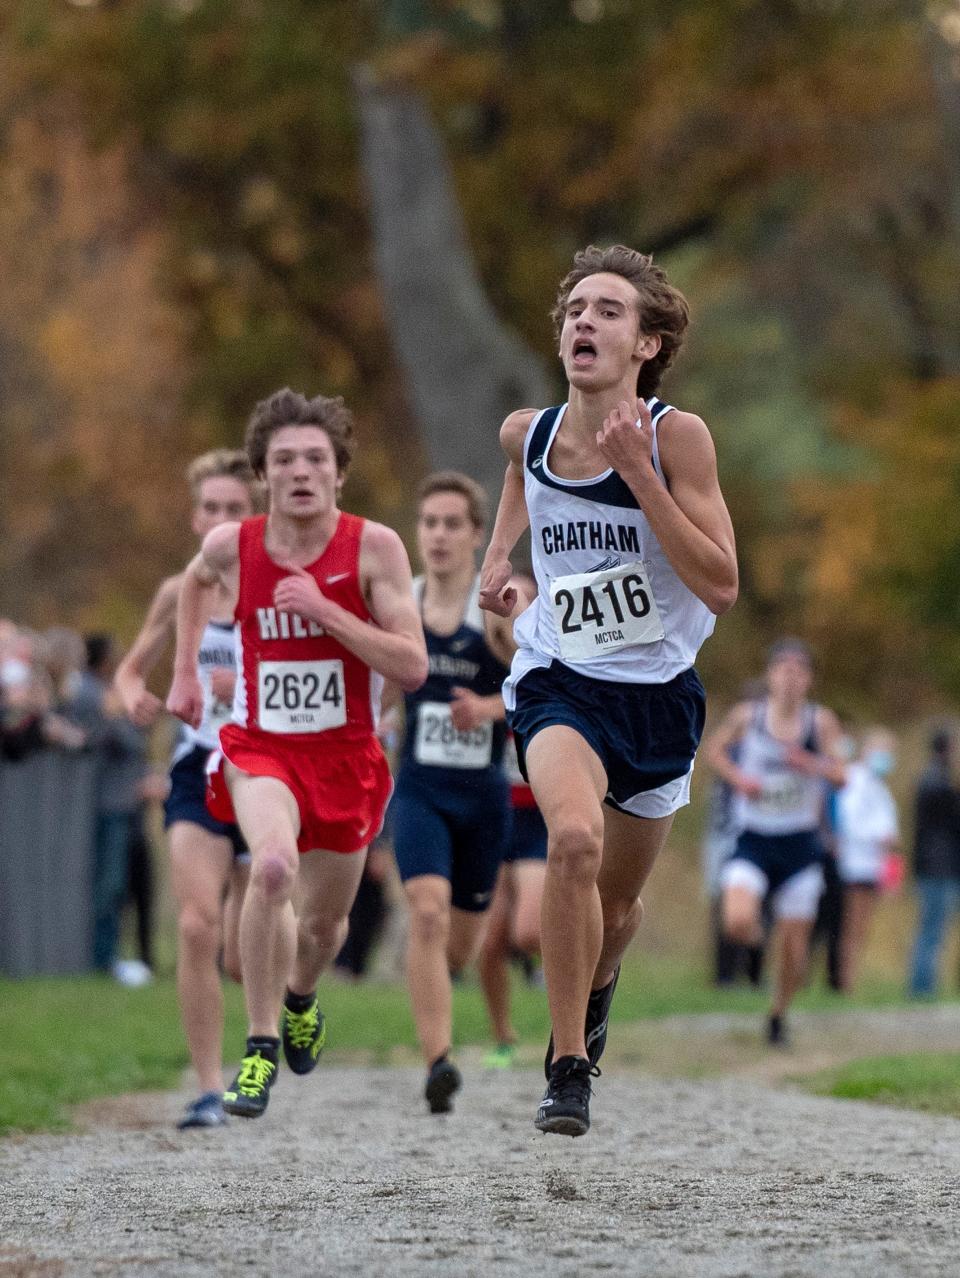 NJAC large-school cross country championships was held at Central Park of Morris County on October 27, 2020. #2416 Ryan Beegle of Chatham HS placed third with a time of 16:16.87.